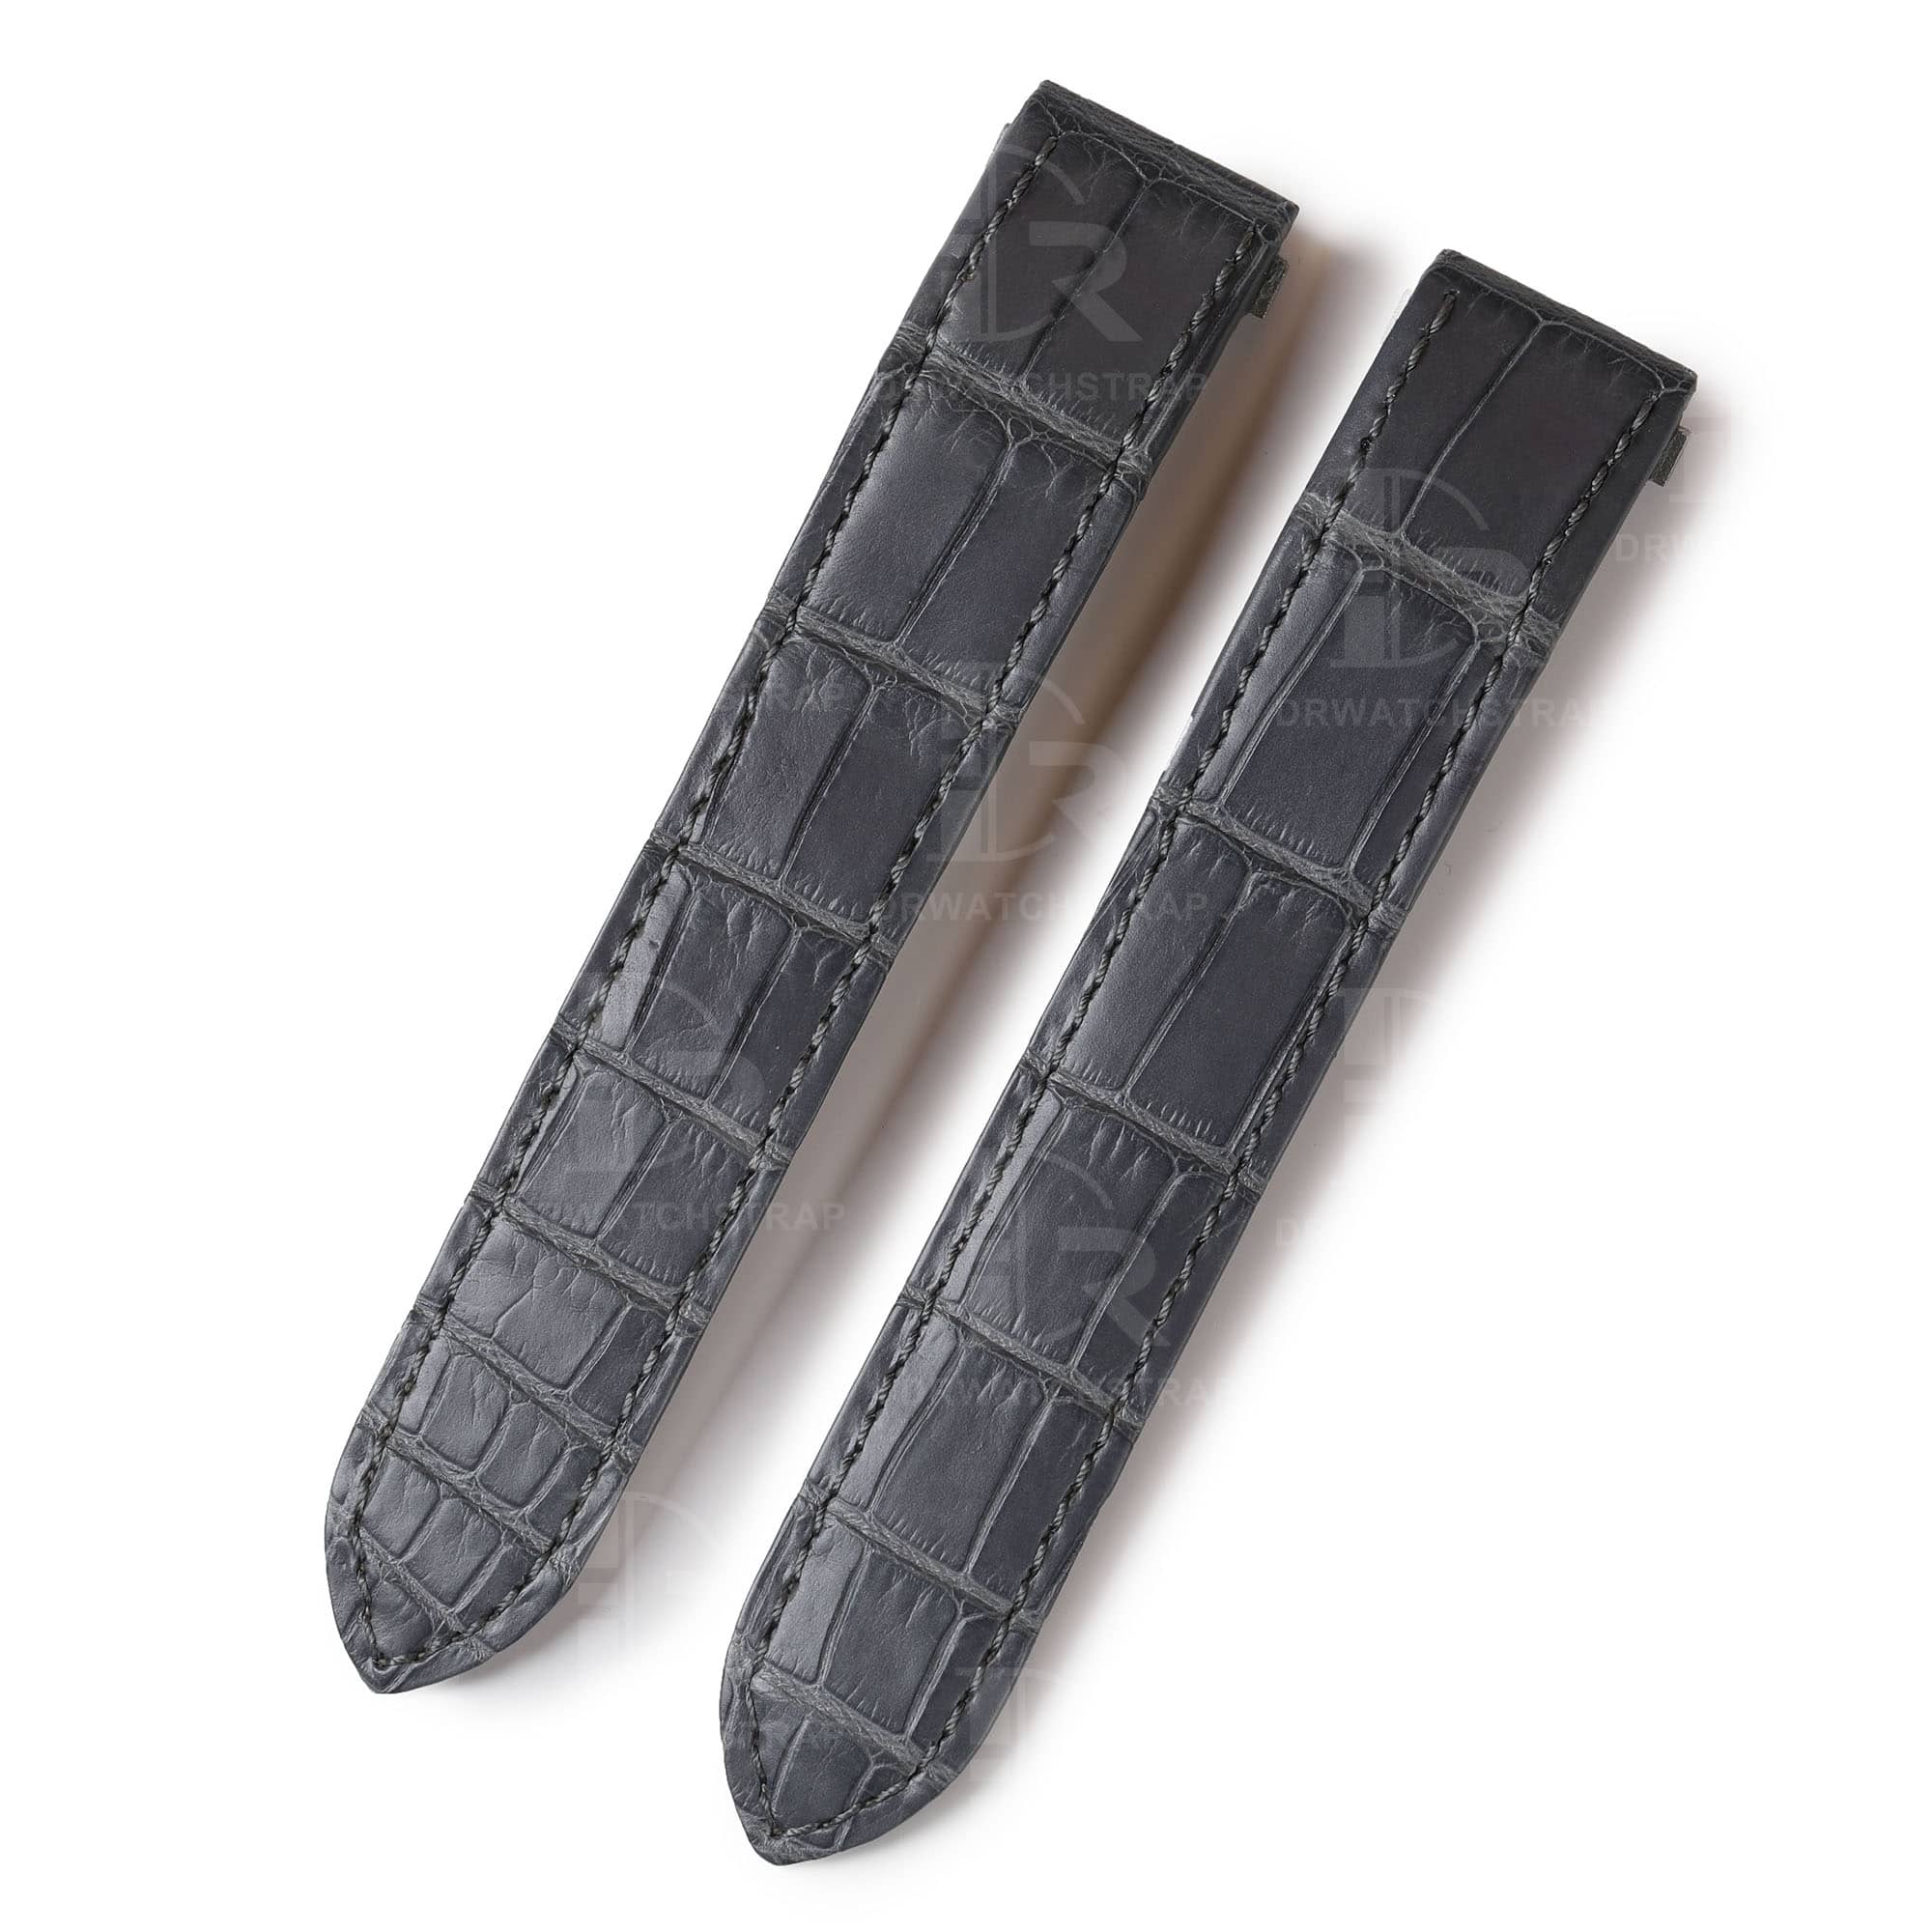 Custom gray alligator leather watch band for Cartier Roadster watch Chronograph